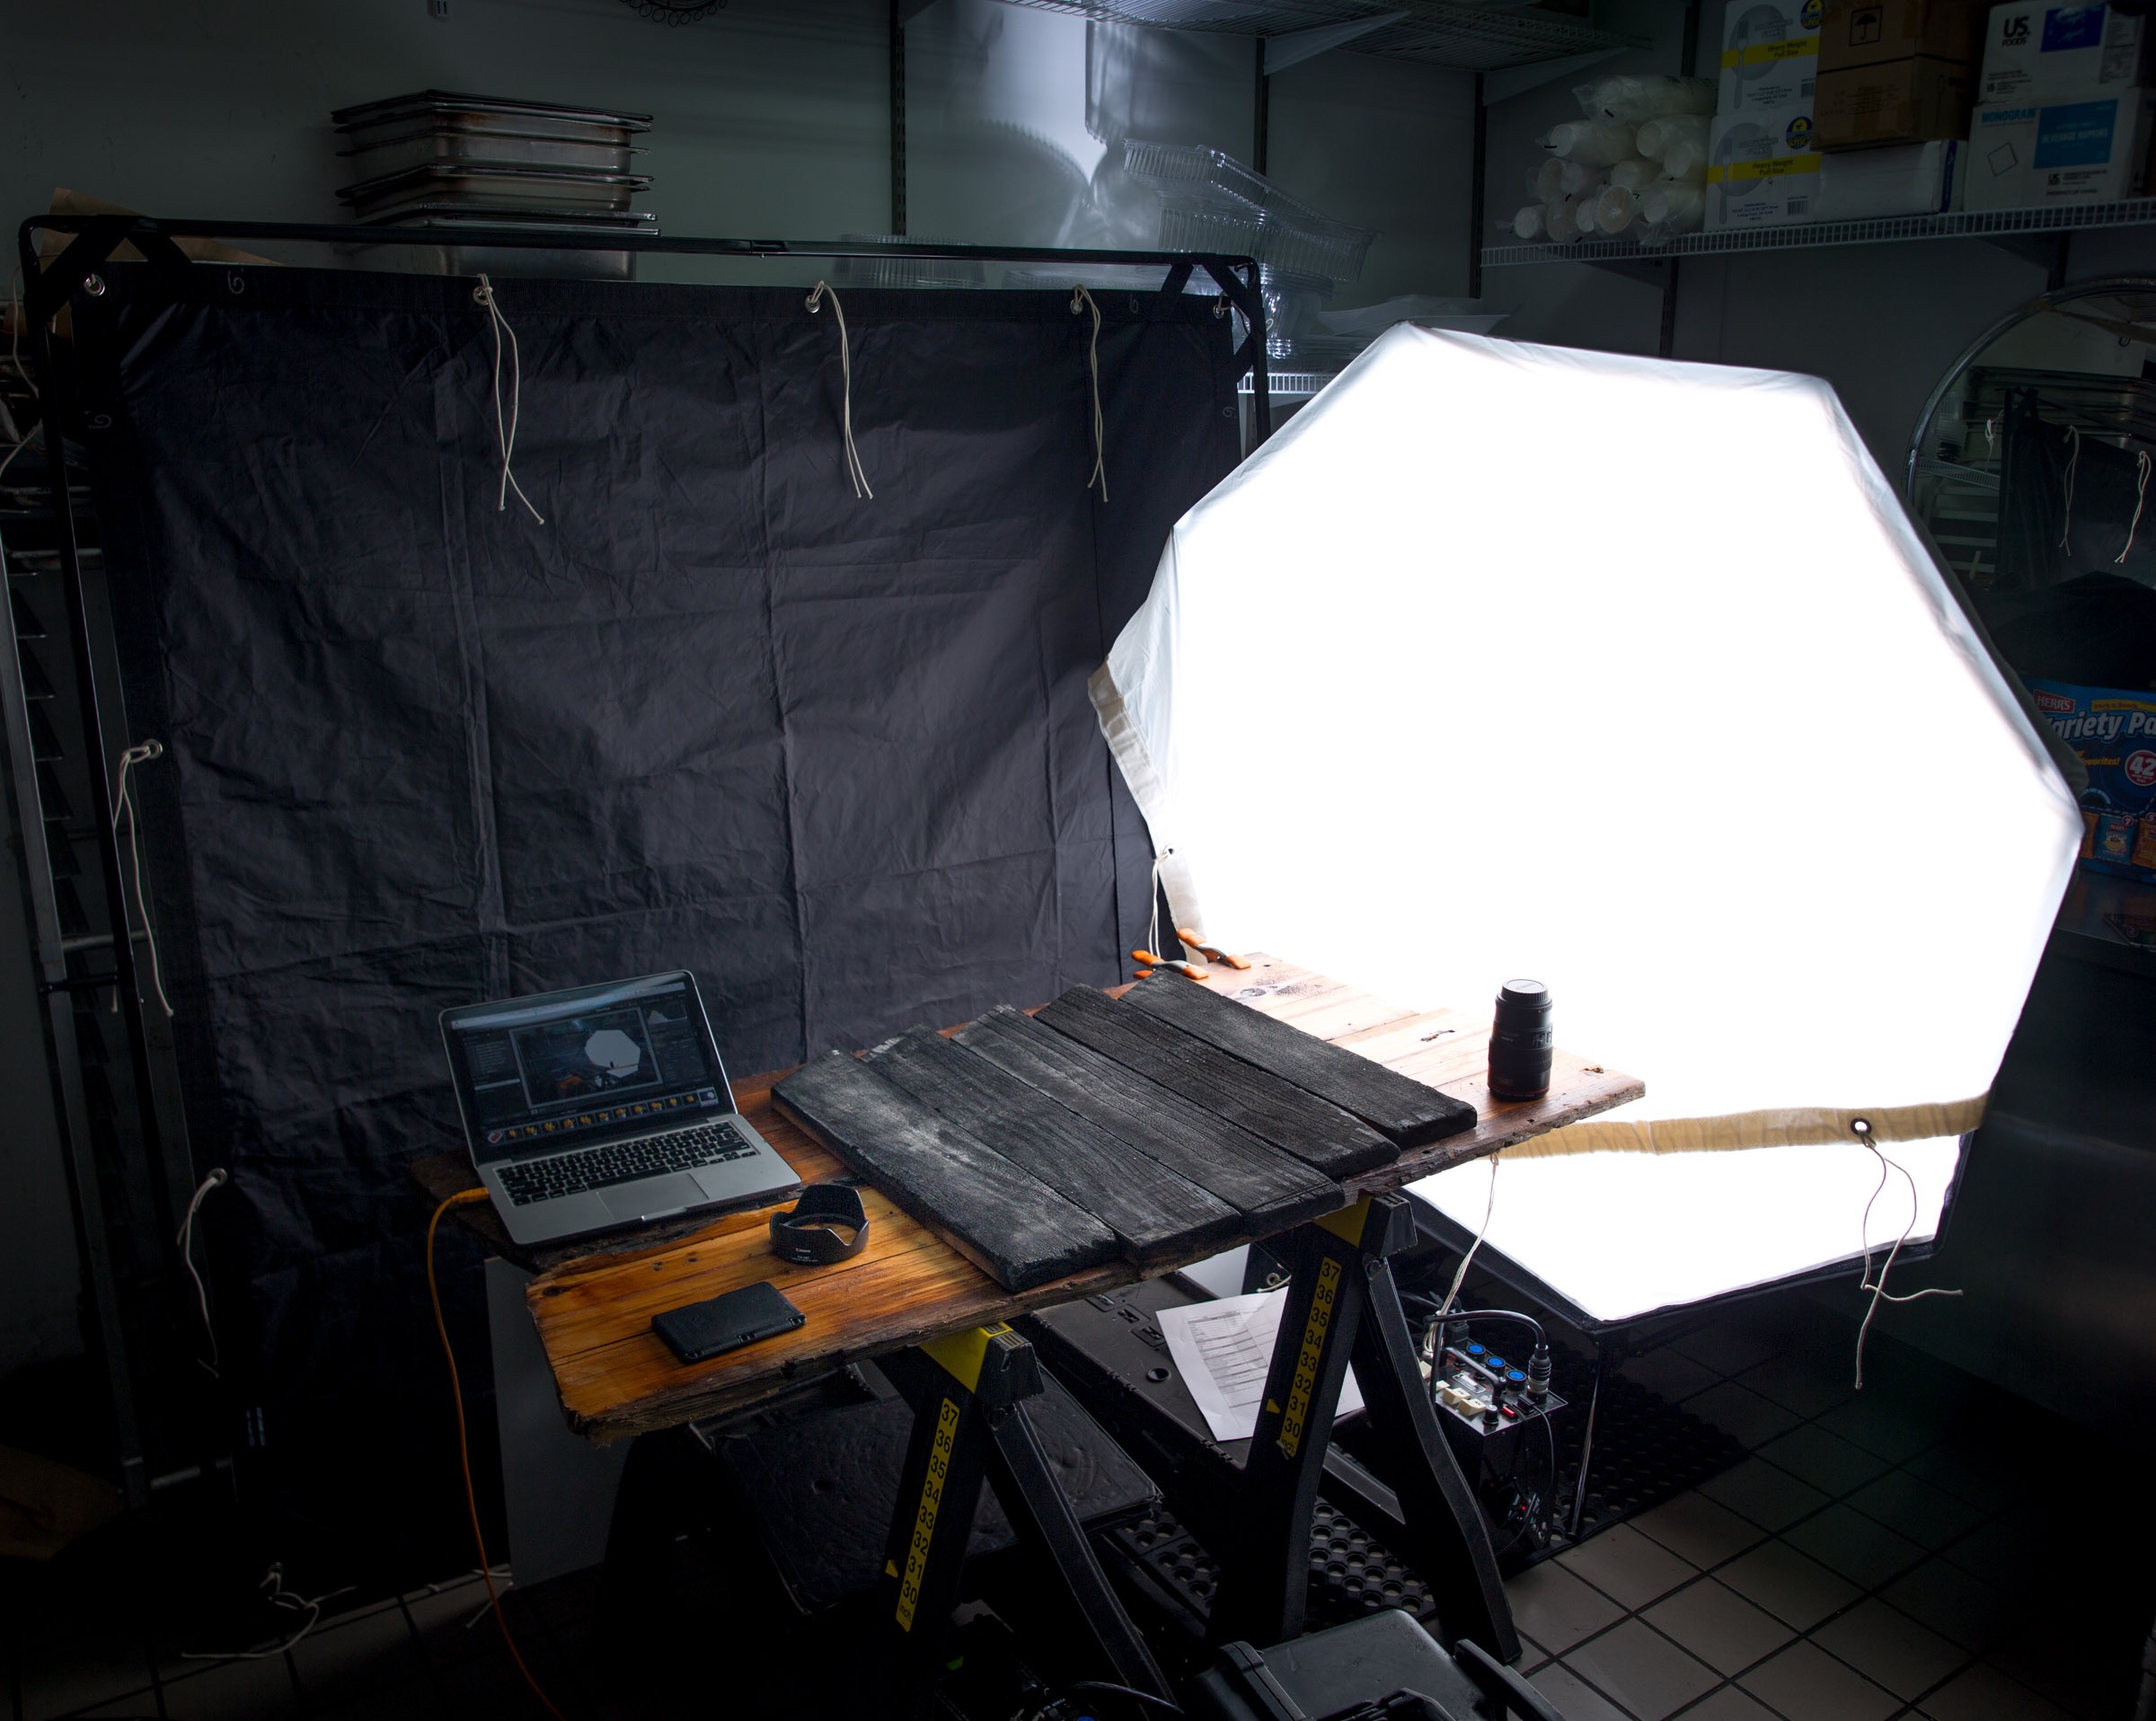 Behind the scenes of food being photographed in the kitchen